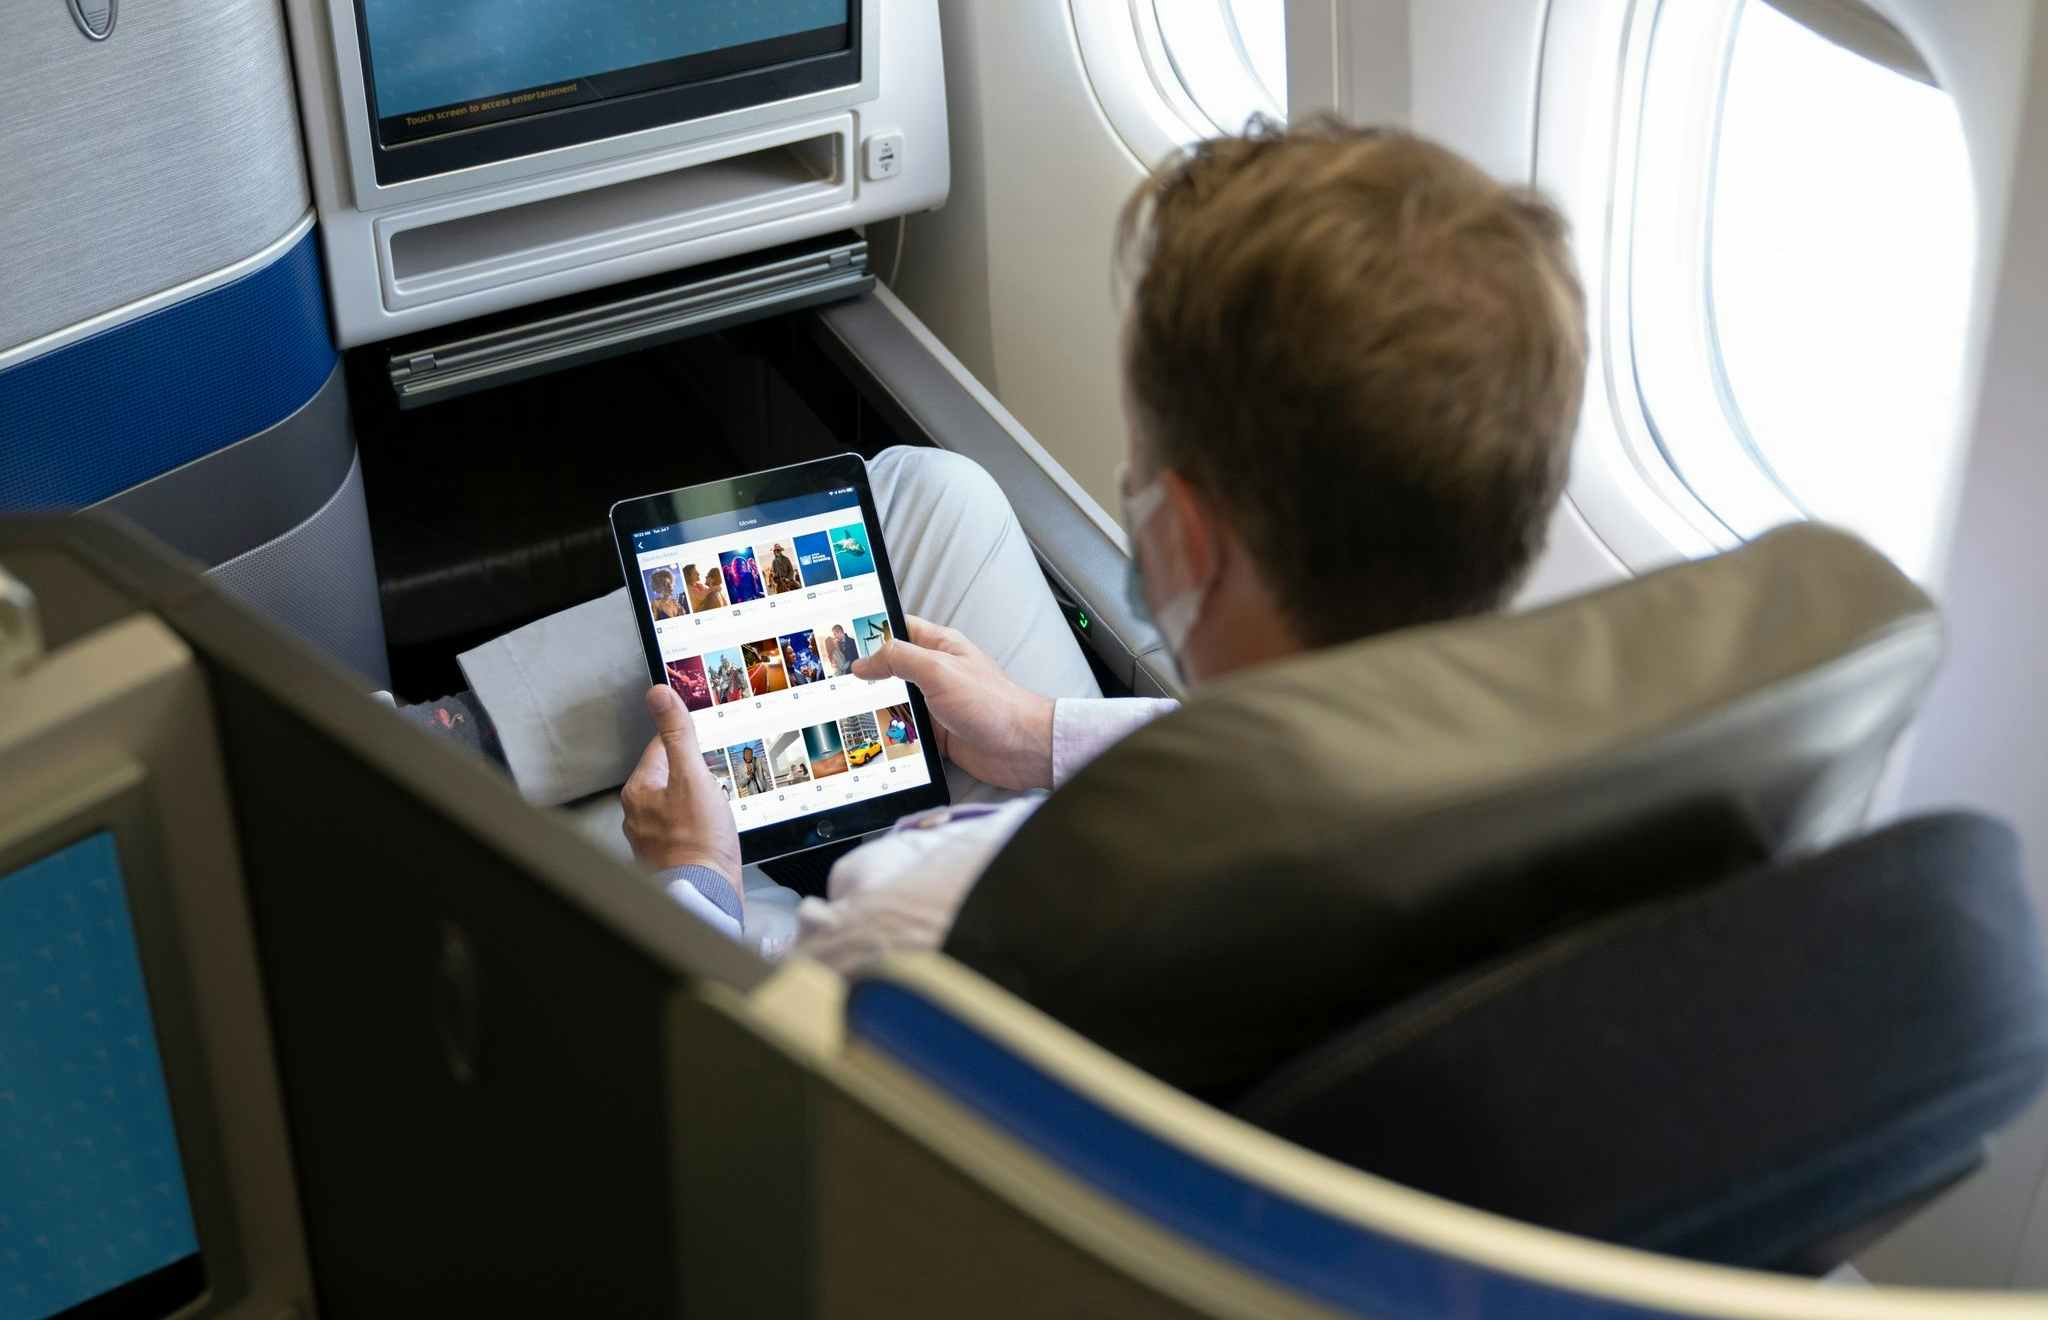 United Airlines app on a tablet